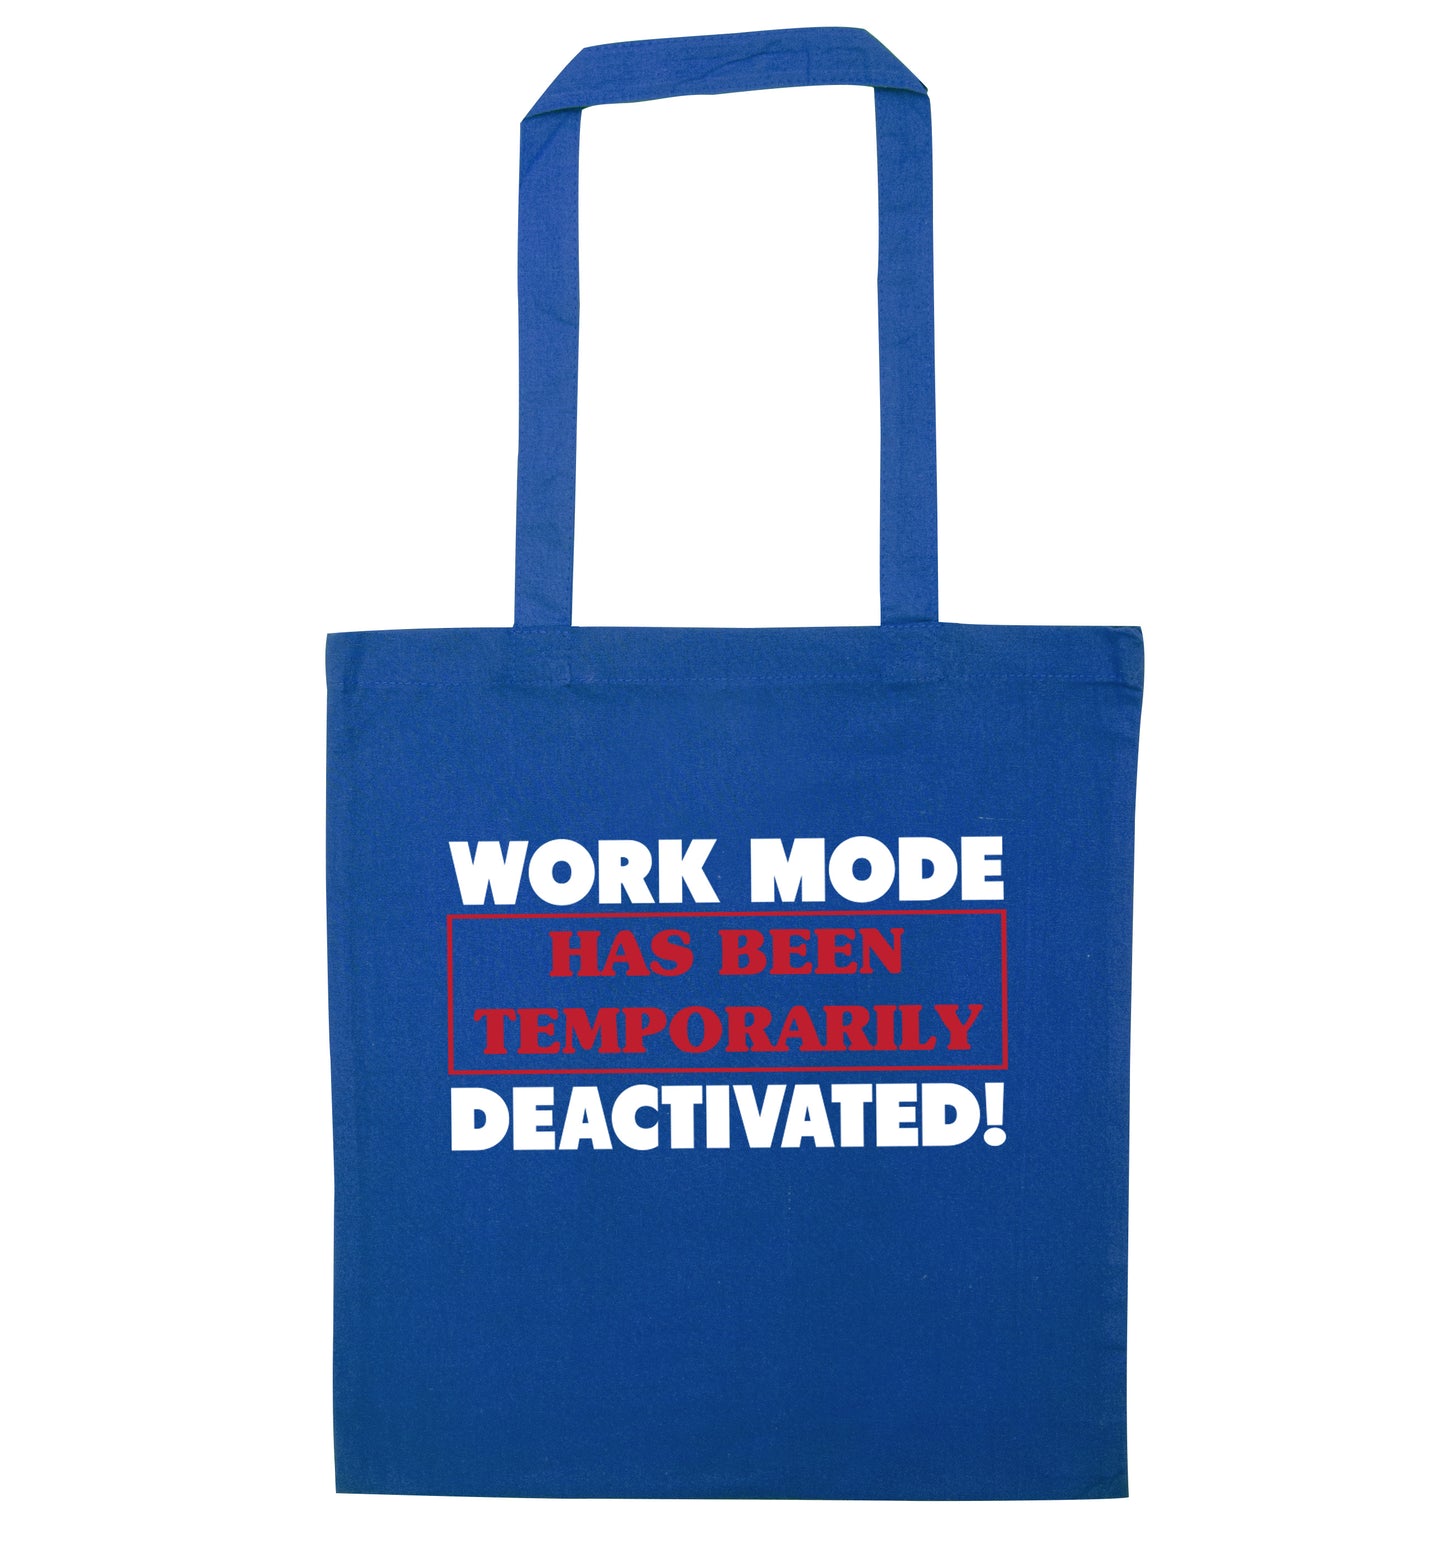 Work mode has now been temporarily deactivated blue tote bag